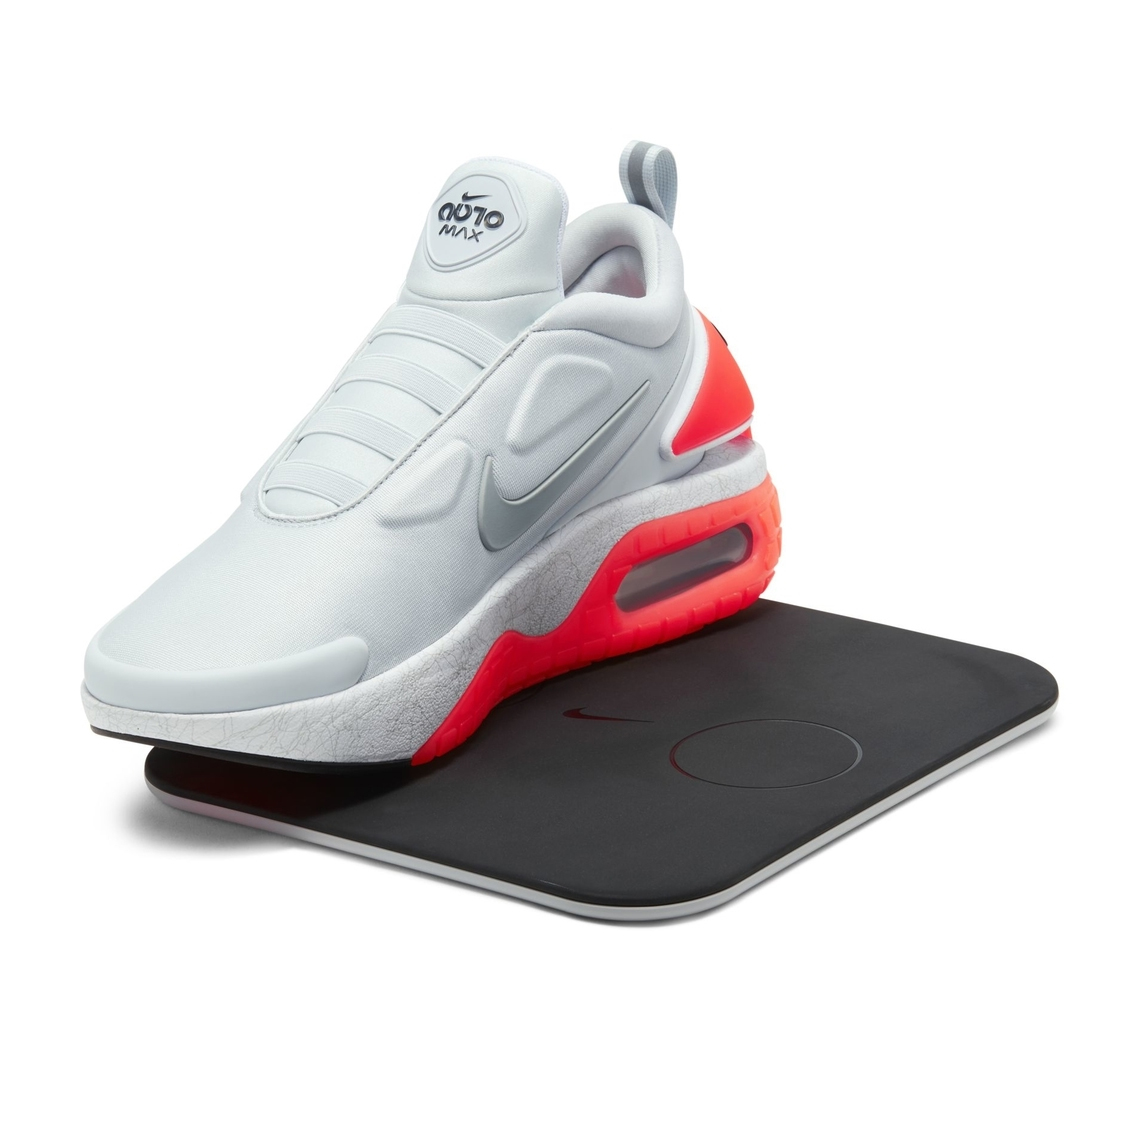 Nike Adapt Auto Max Infrared Official Images 7